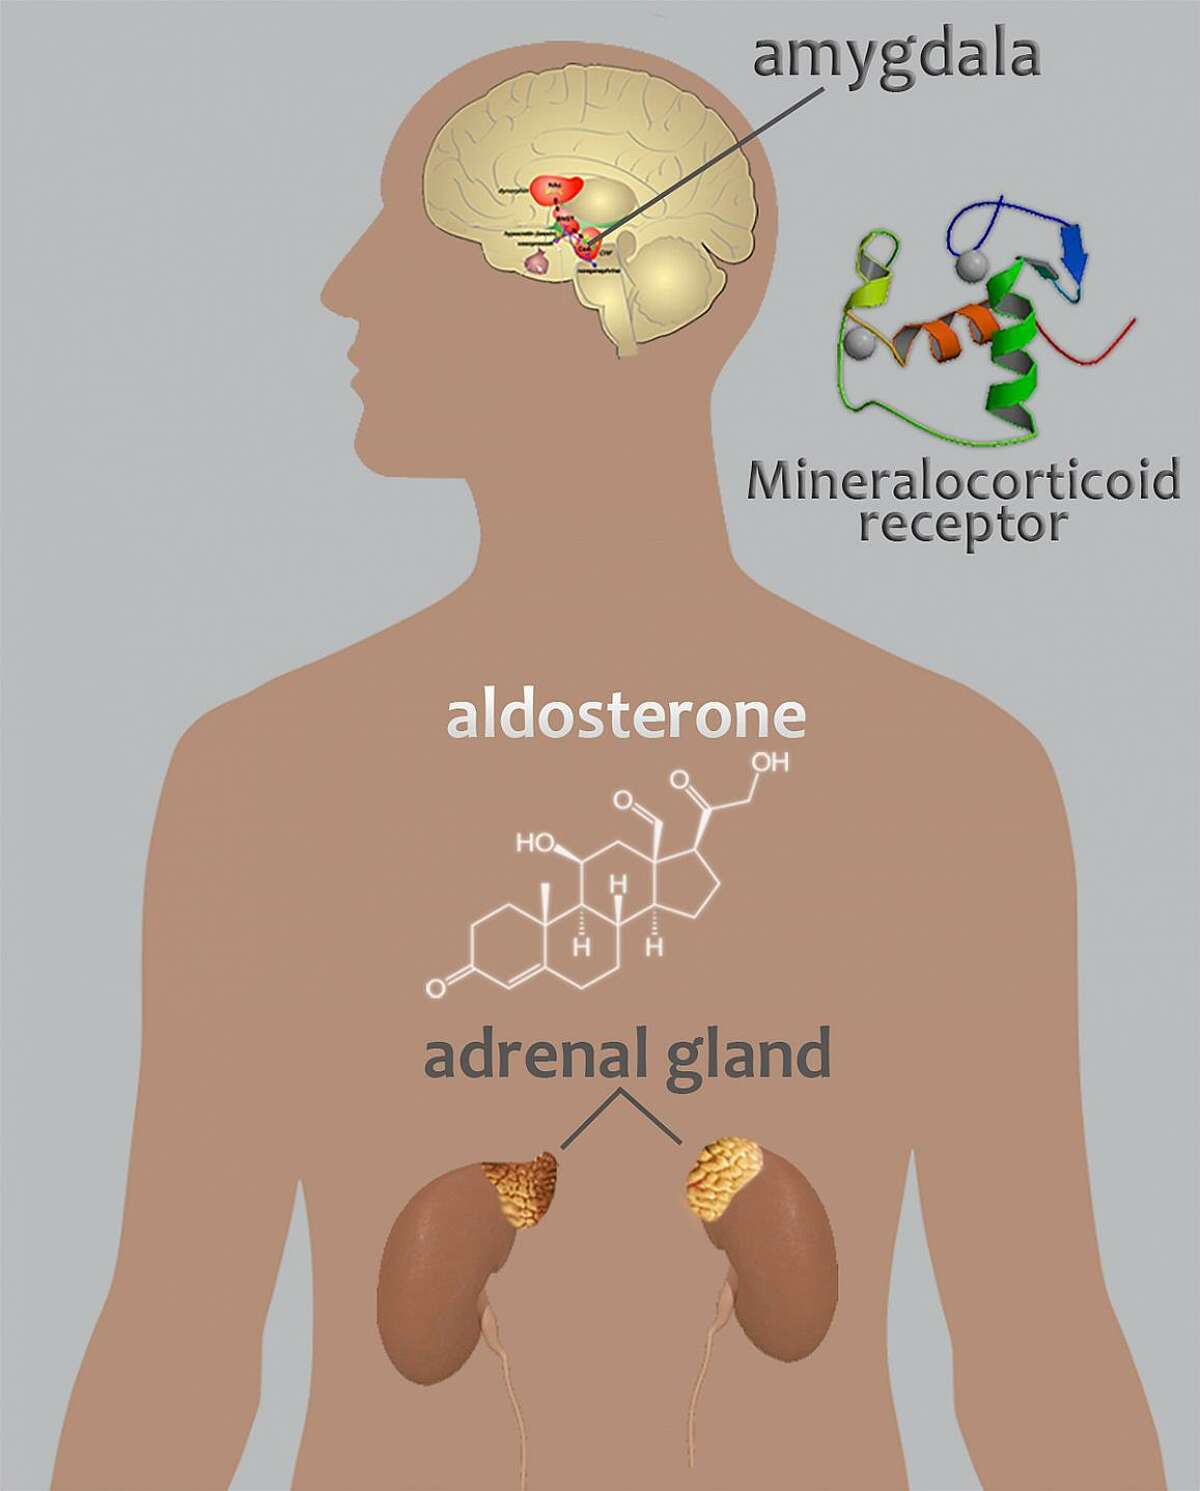 A new study led by scientists at the National Institute on Alcohol Abuse and Alcoholism, part of the National Institutes of Health shows that aldosterone, a hormone produced in the adrenal glands, may contribute to alcohol use disorders. Image courtesy of the National Institutes of Health.